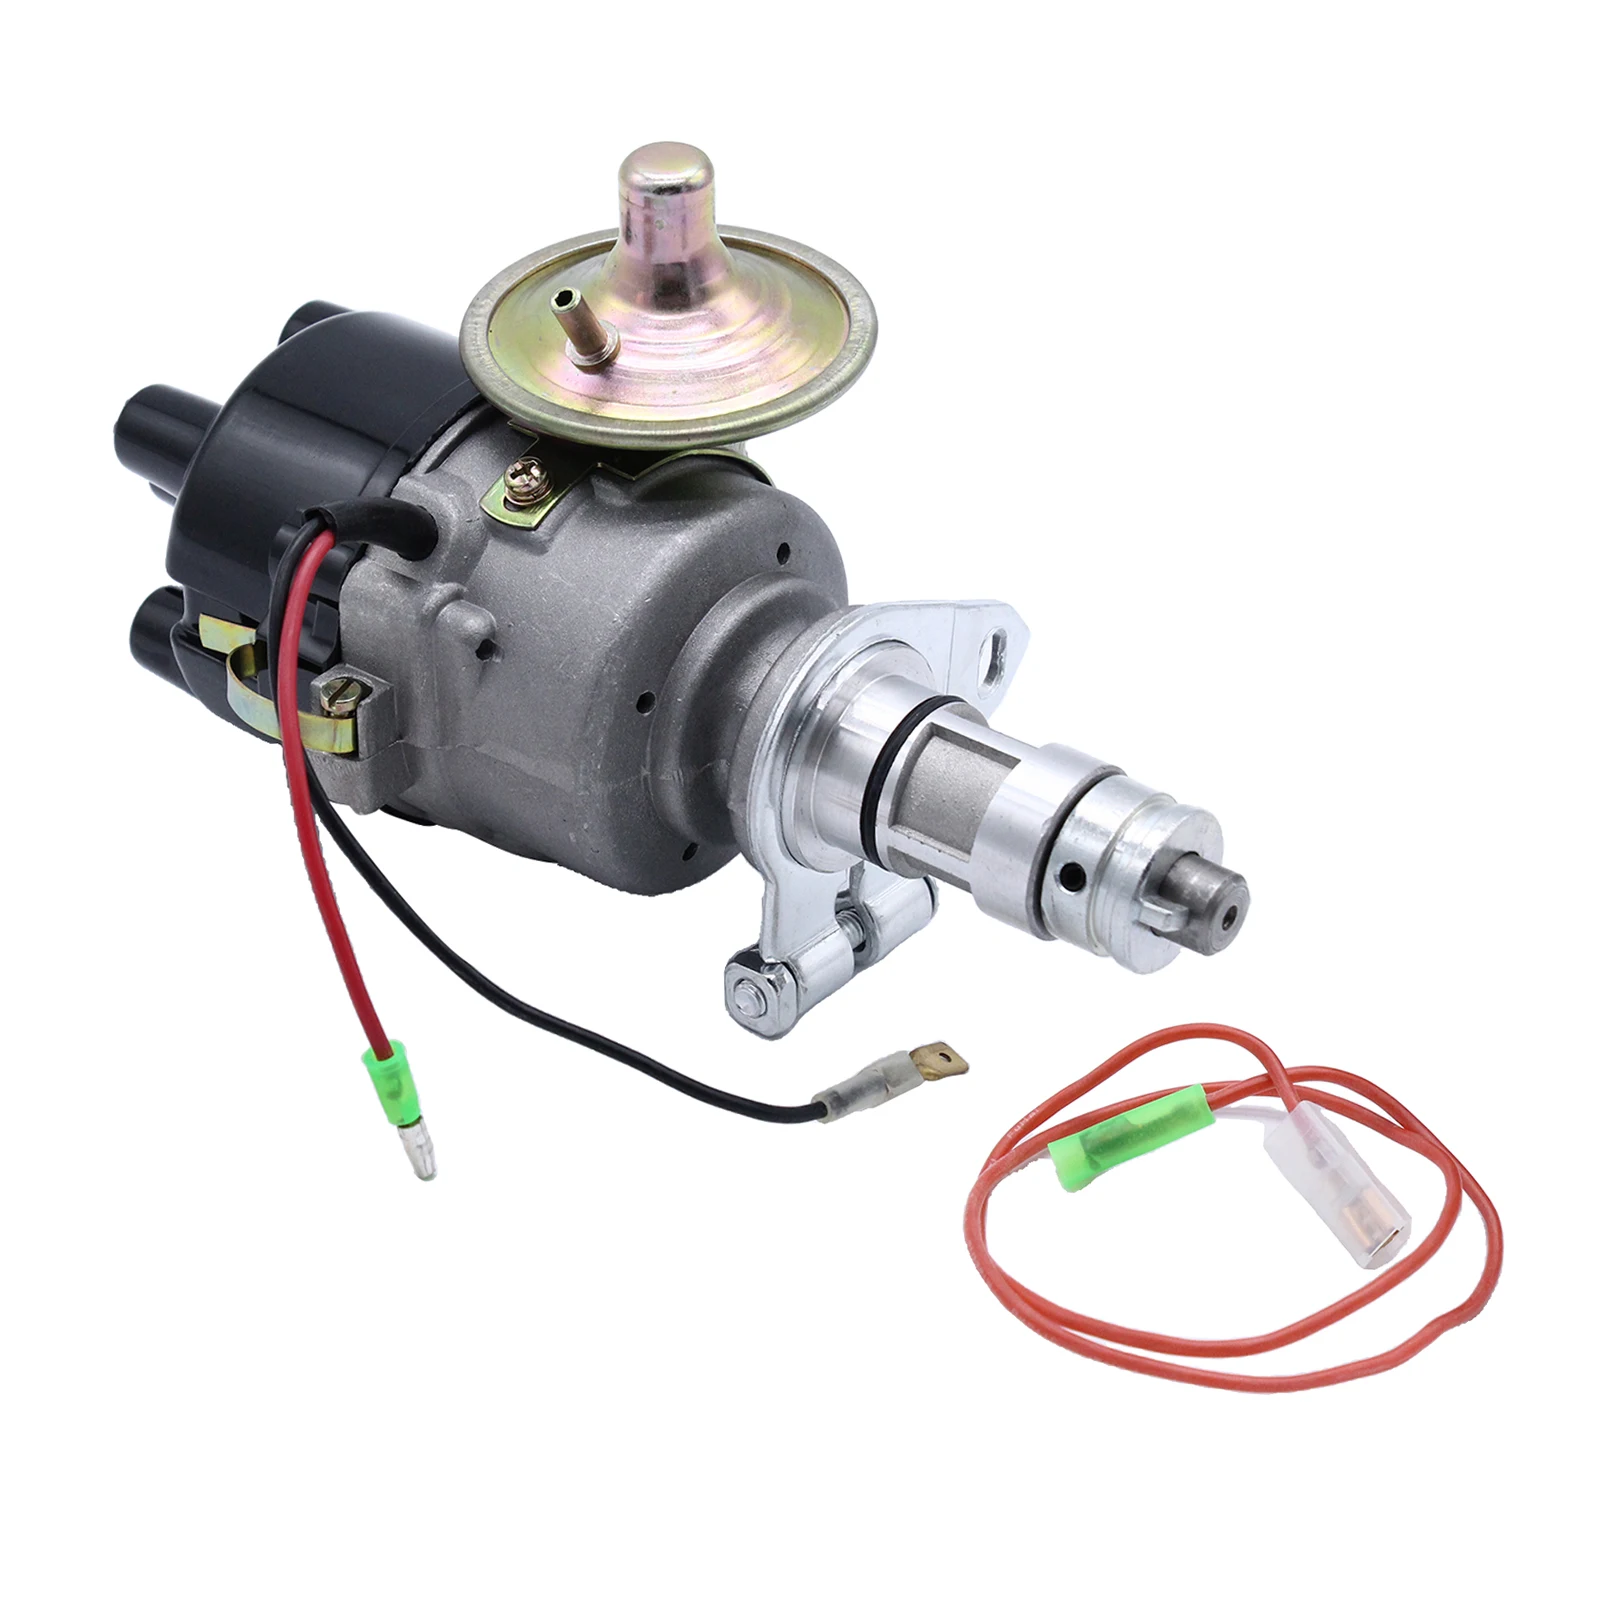 Durable Aluminium Alloy 4 Cylinder Electronic Distributor Replacement for Lucas 45D & 25D